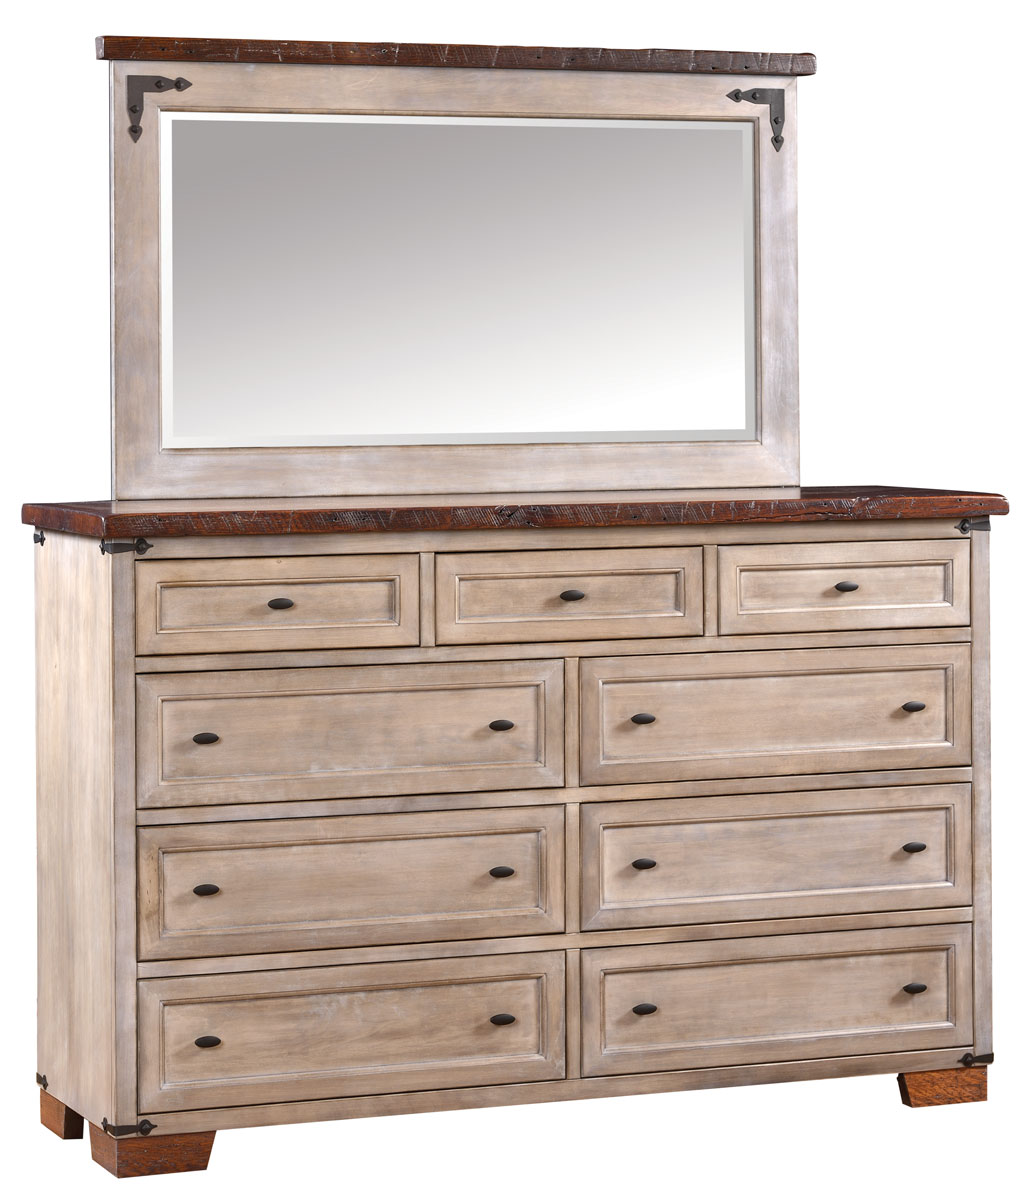 Farmhouse Heritage Tall Dresser with Mirror 